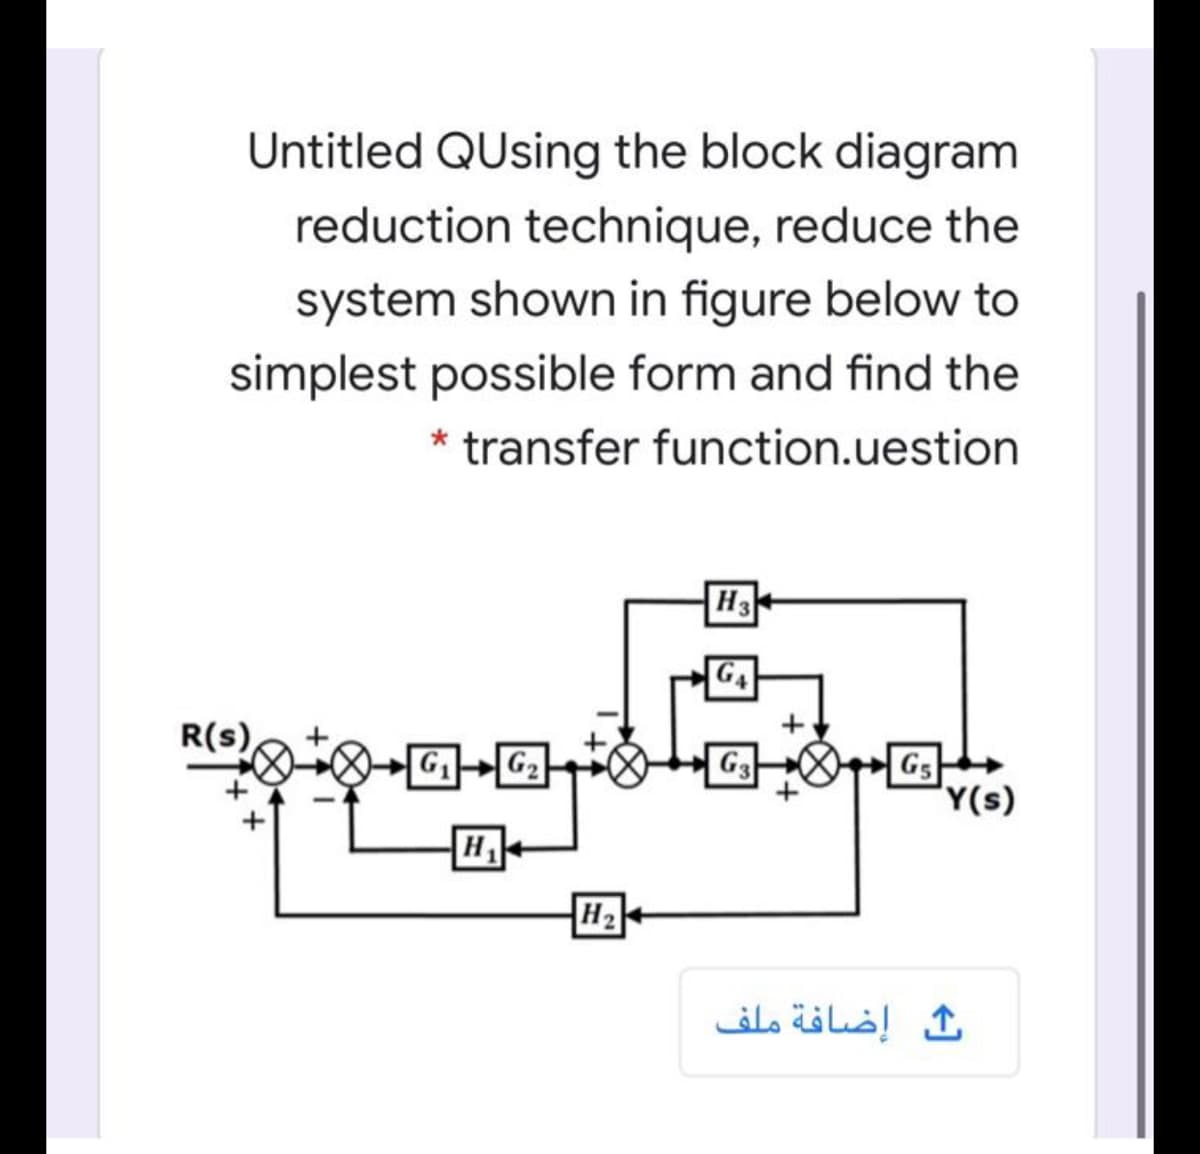 Untitled QUsing the block diagram
reduction technique, reduce the
system shown in figure below to
simplest possible form and find the
* transfer function.uestion
H3
G4
R(s)
G
G2
G3
GS
'Y(s)
H
H2
